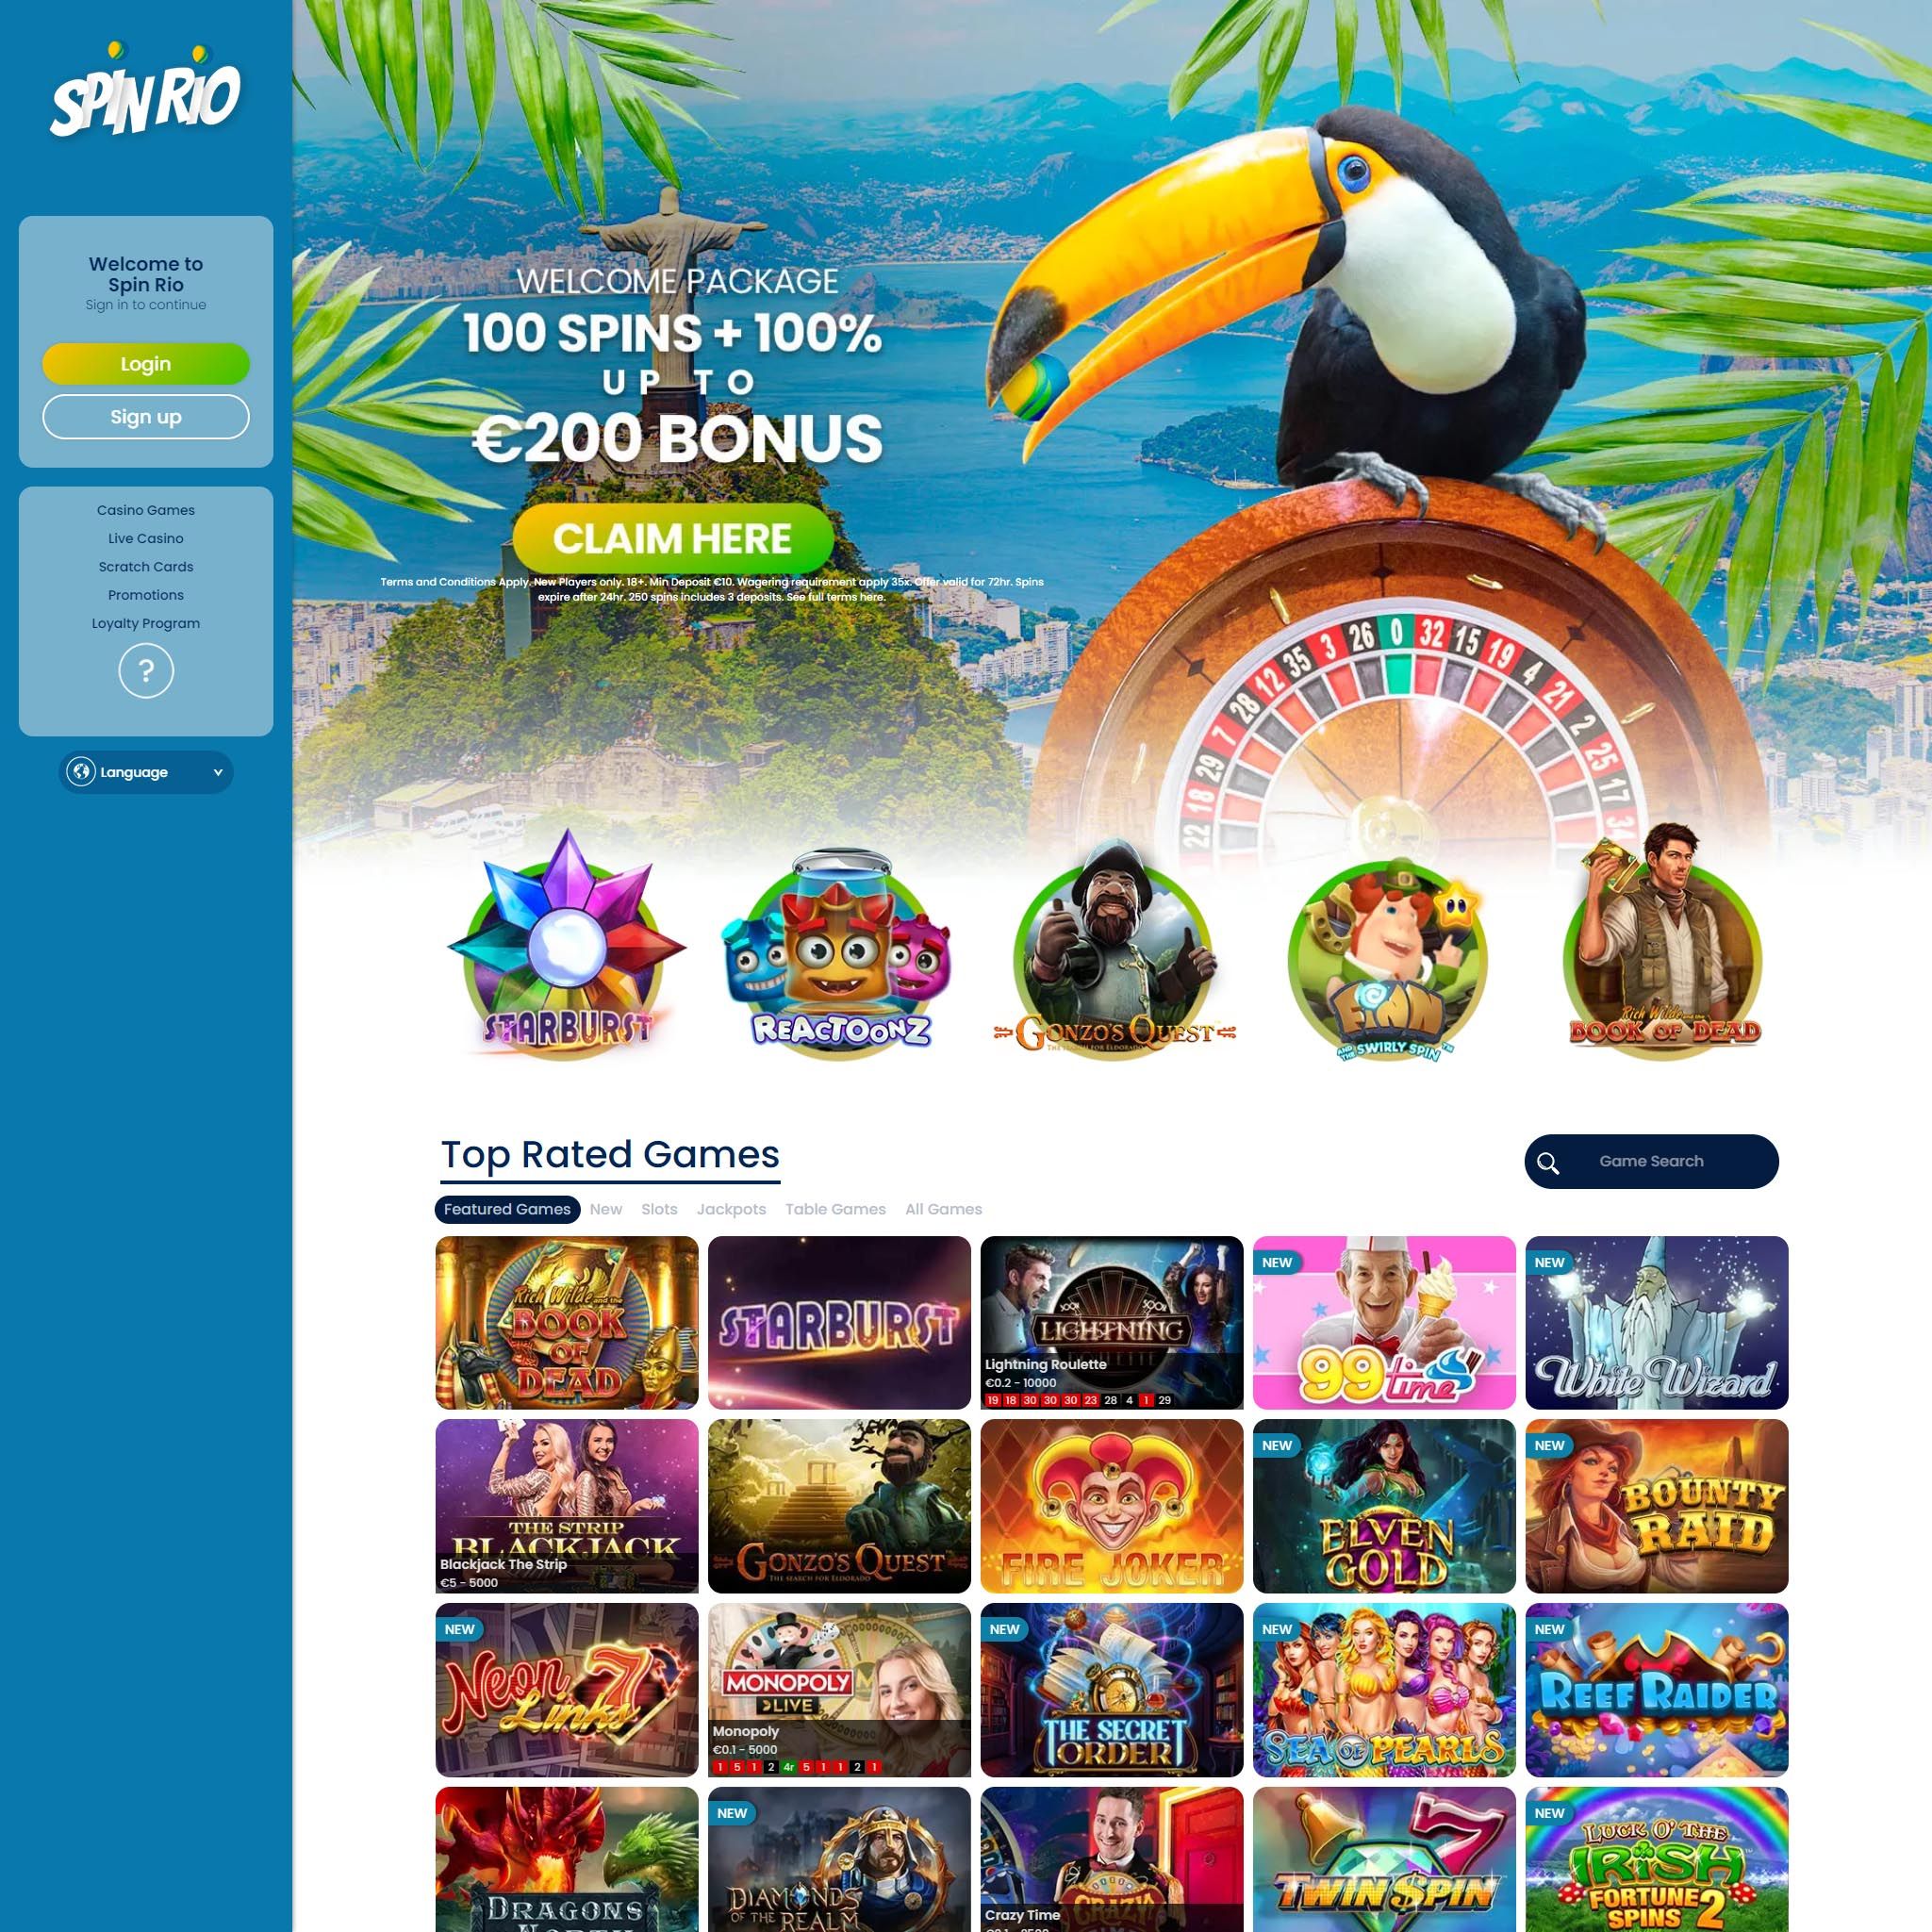 Spin Rio Casino NZ review by Mr. Gamble